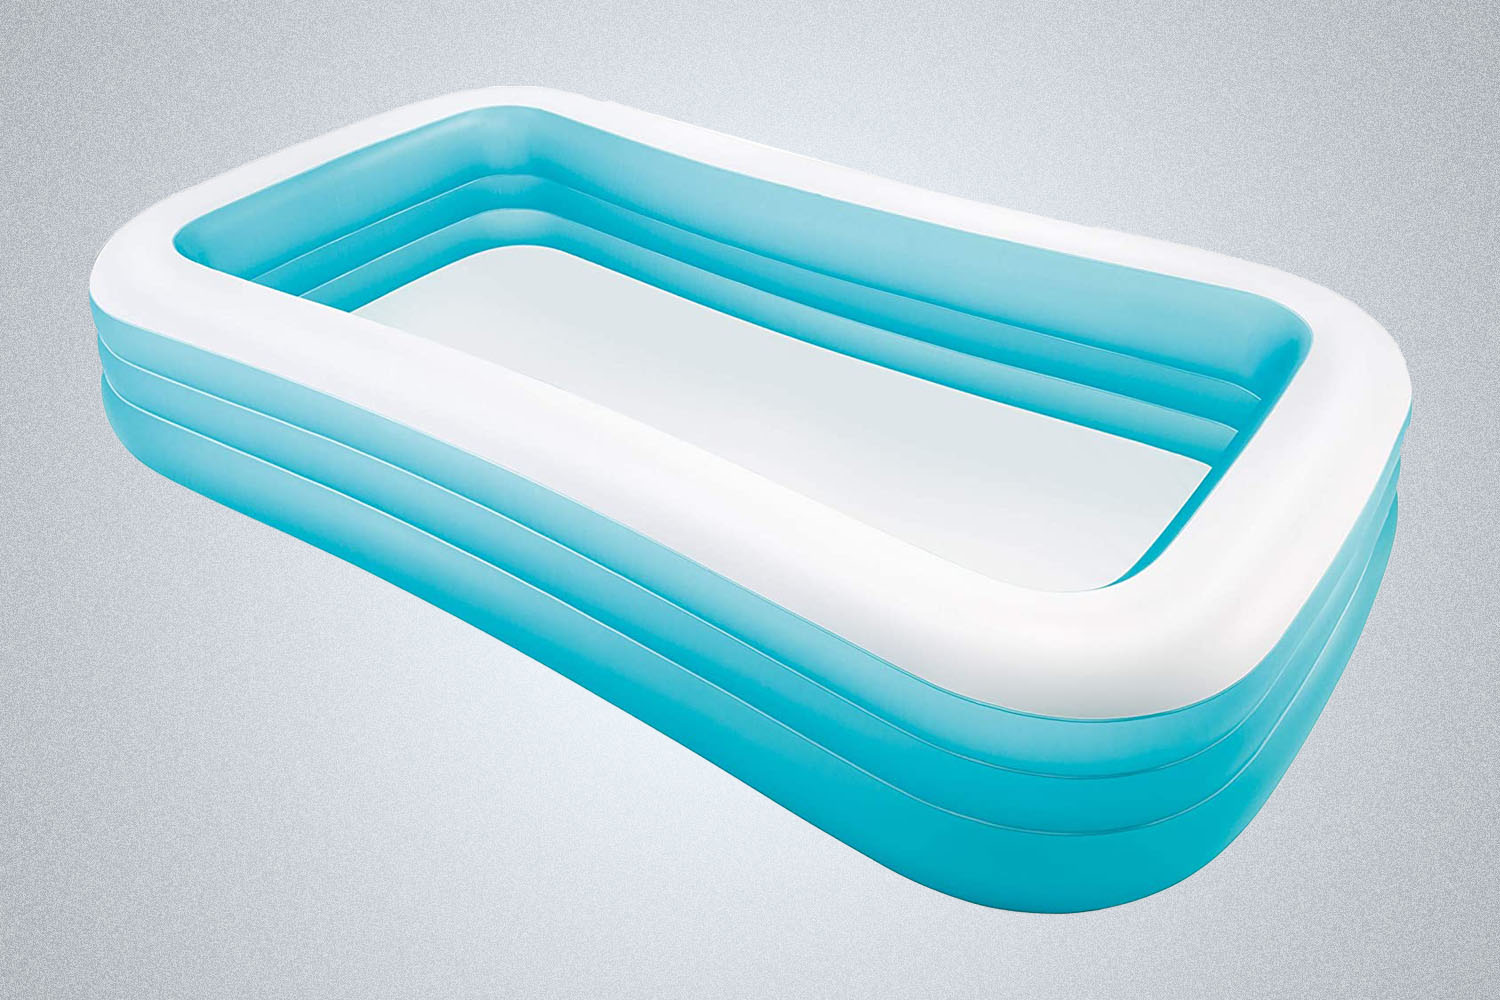 an Intex swimming pool from Amazon on a grey background